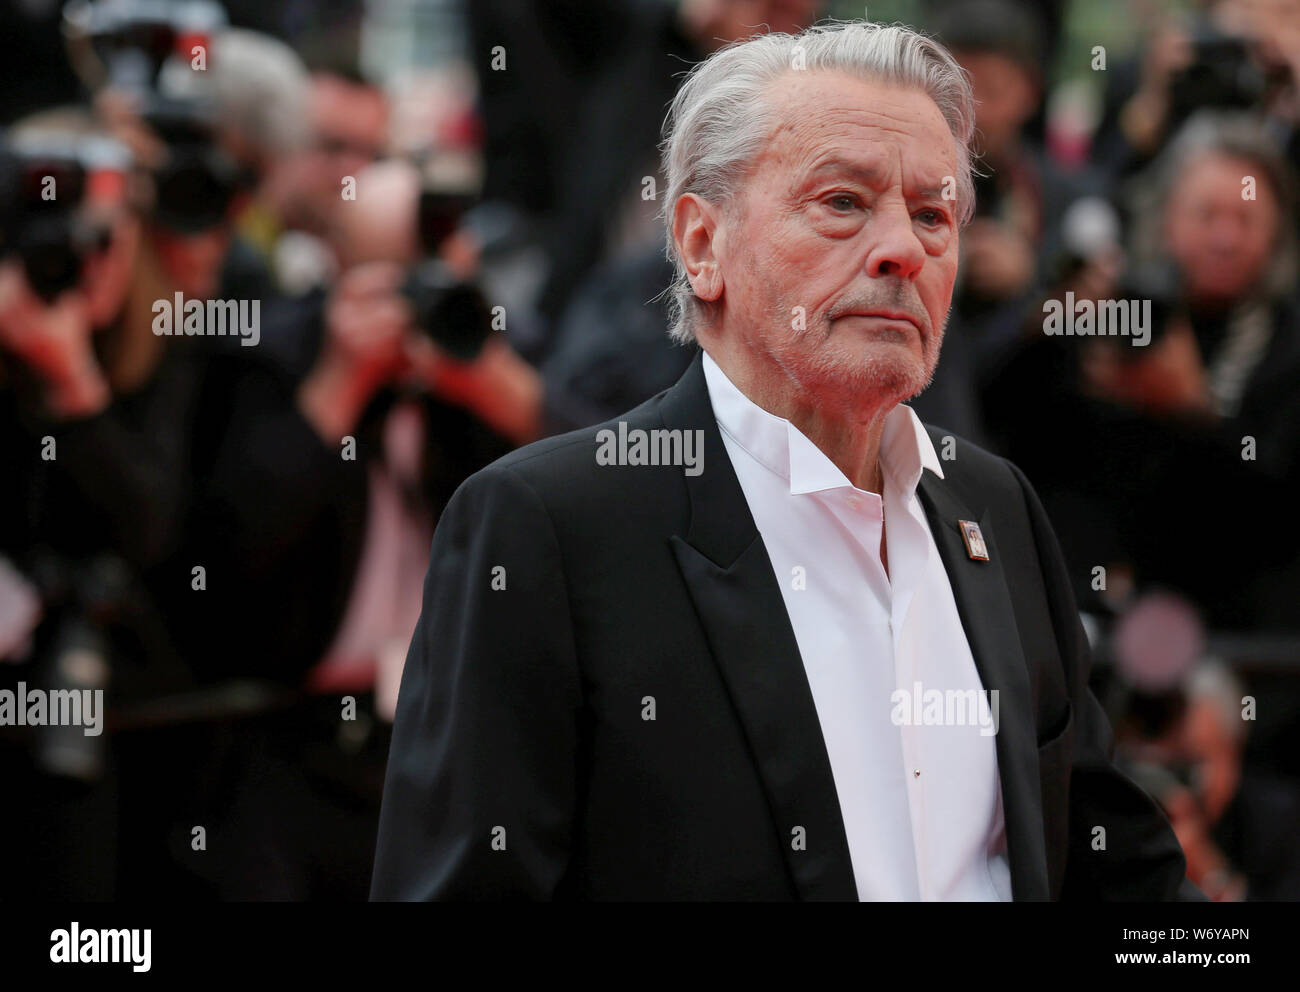 CANNES, FRANCE - MAY 19: Alain Delon attends A Hidden Life screening during the 72nd Cannes Film Festival (Mickael Chavet) Stock Photo